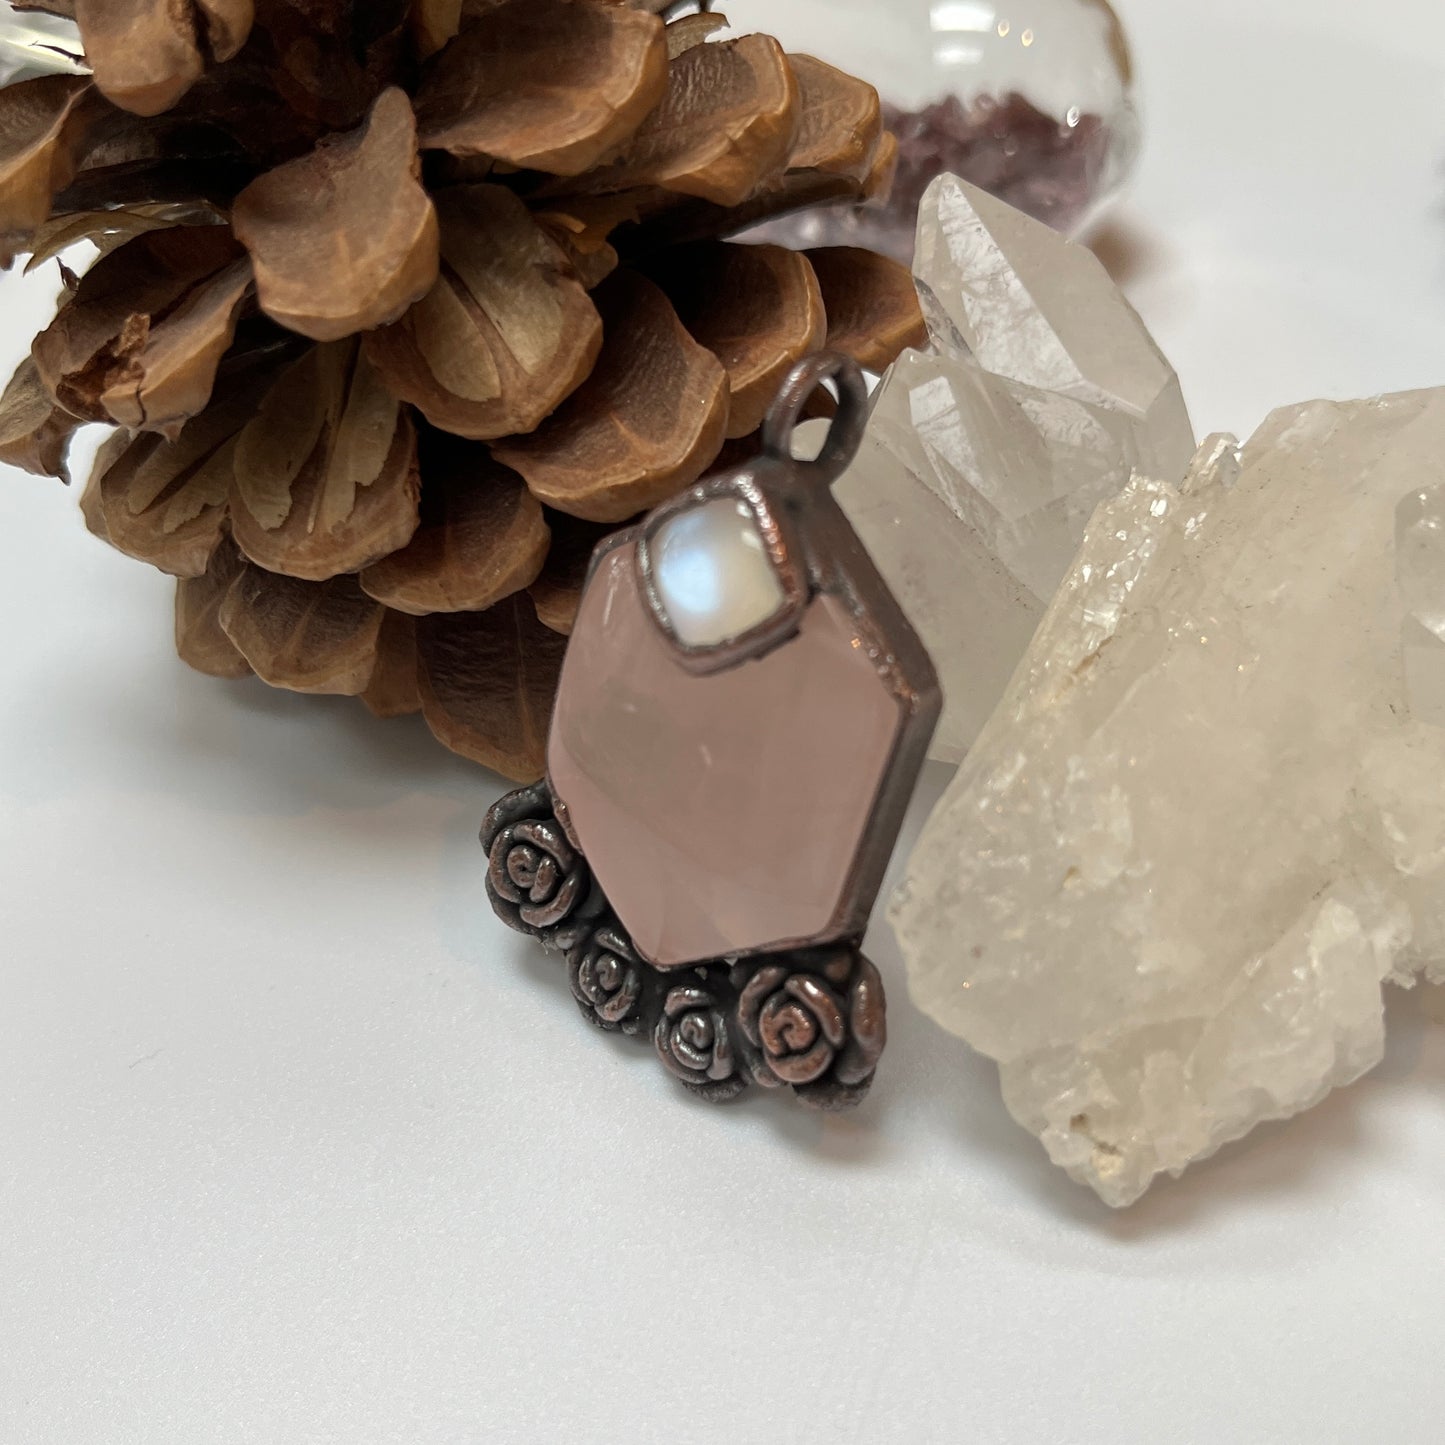 Rose Quartz Moonstone and Roses Crystal Necklace